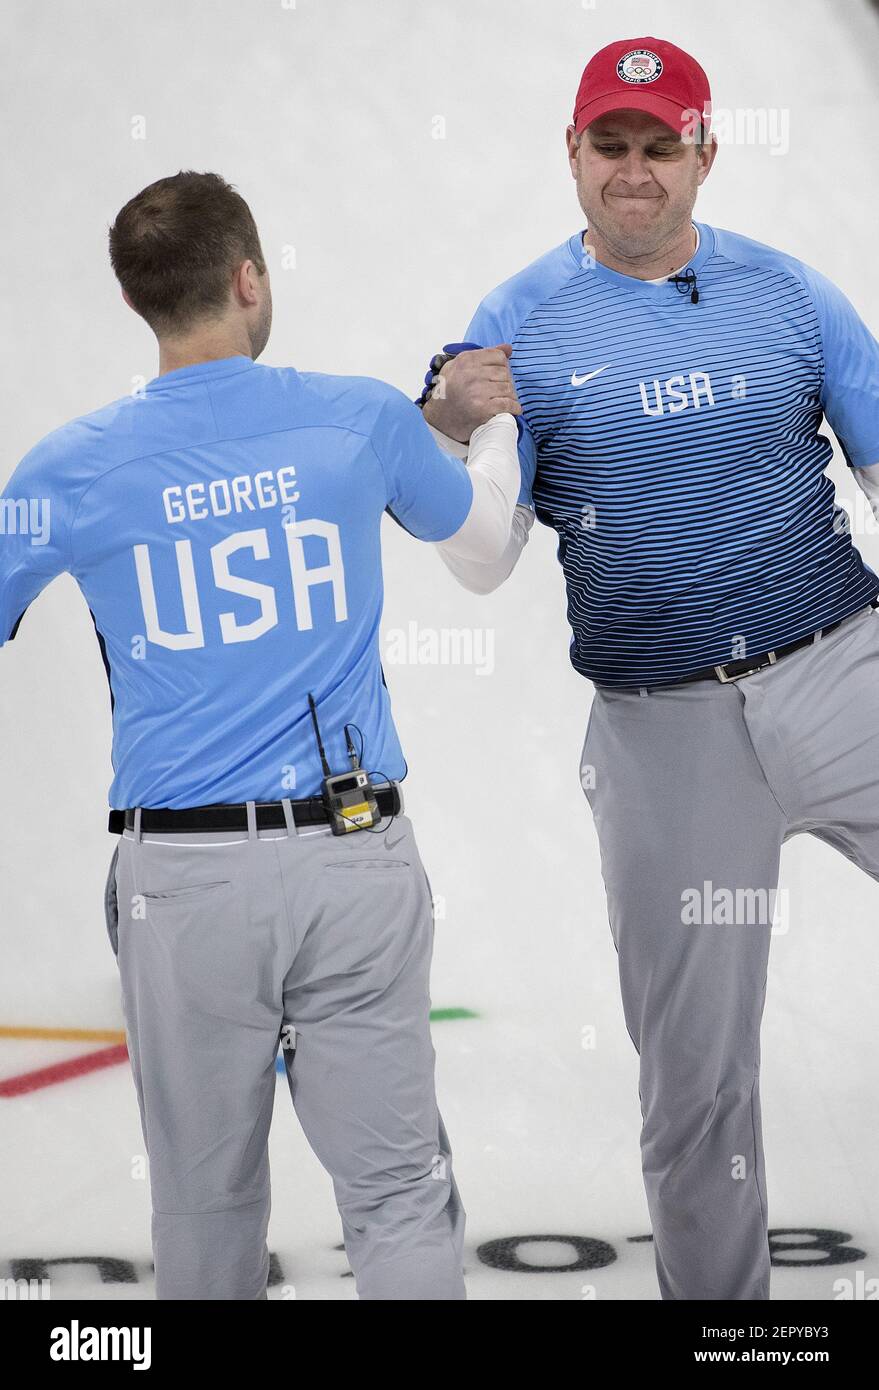 Team skip John Shuster, right, and Tyler George after Shuster threw the last stone and scoring 5 on the eighth end against Sweden during the gold-medal match on Saturday, Feb. 24, 2018, at the Pyeongchang Winter Olympics' Gangneung Curling Centre. The USA won, 10-7. (Photo by Carlos Gonzalez/Minneapolis Star Tribune/TNS/Sipa USA) Stock Photo